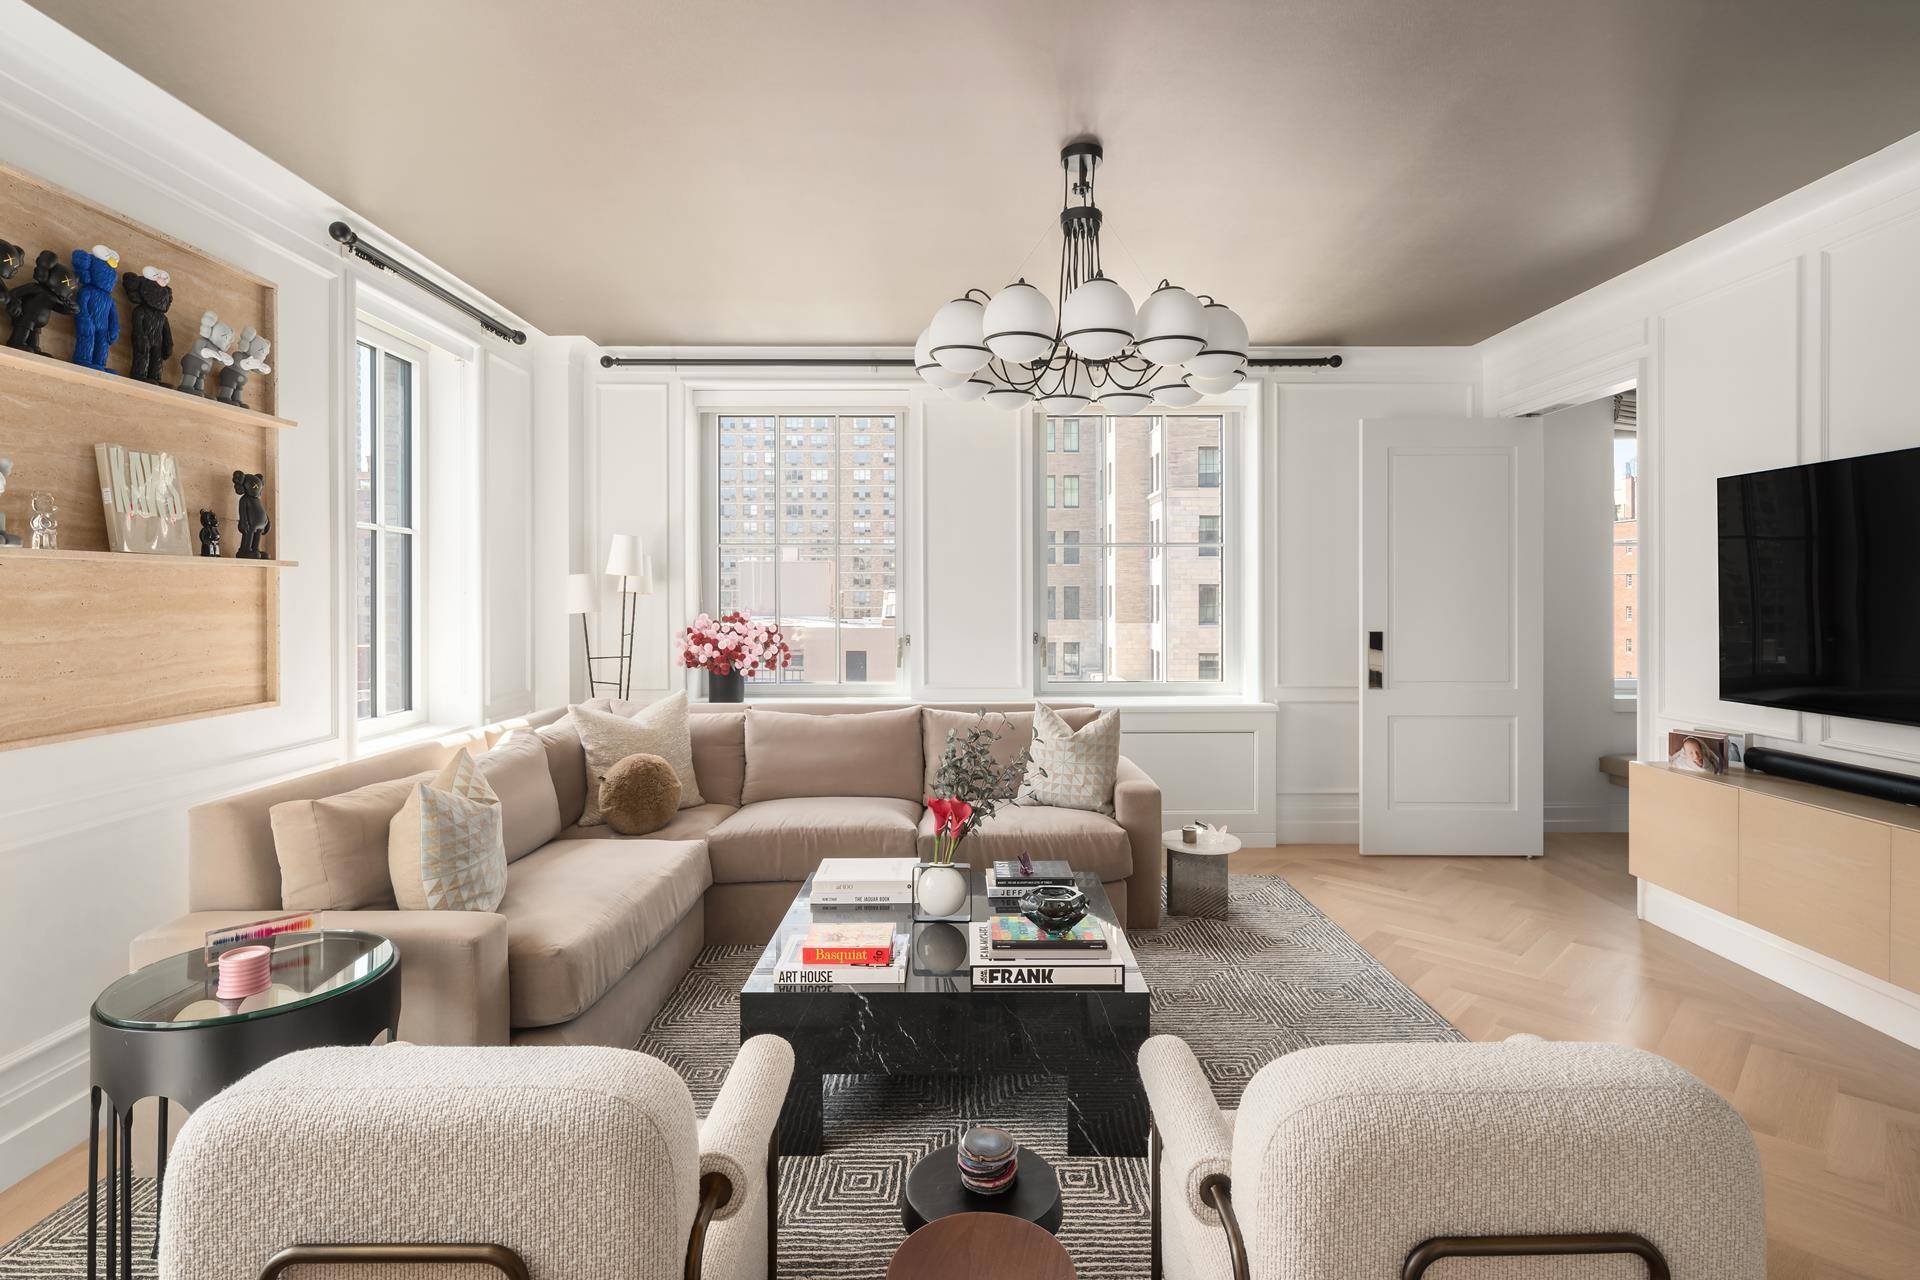 Introducing Apartment 10B at Beckford House, designed by the legendary Studio Sofield, located in one of the most sought after boutique condominiums on the Upper Eastside.